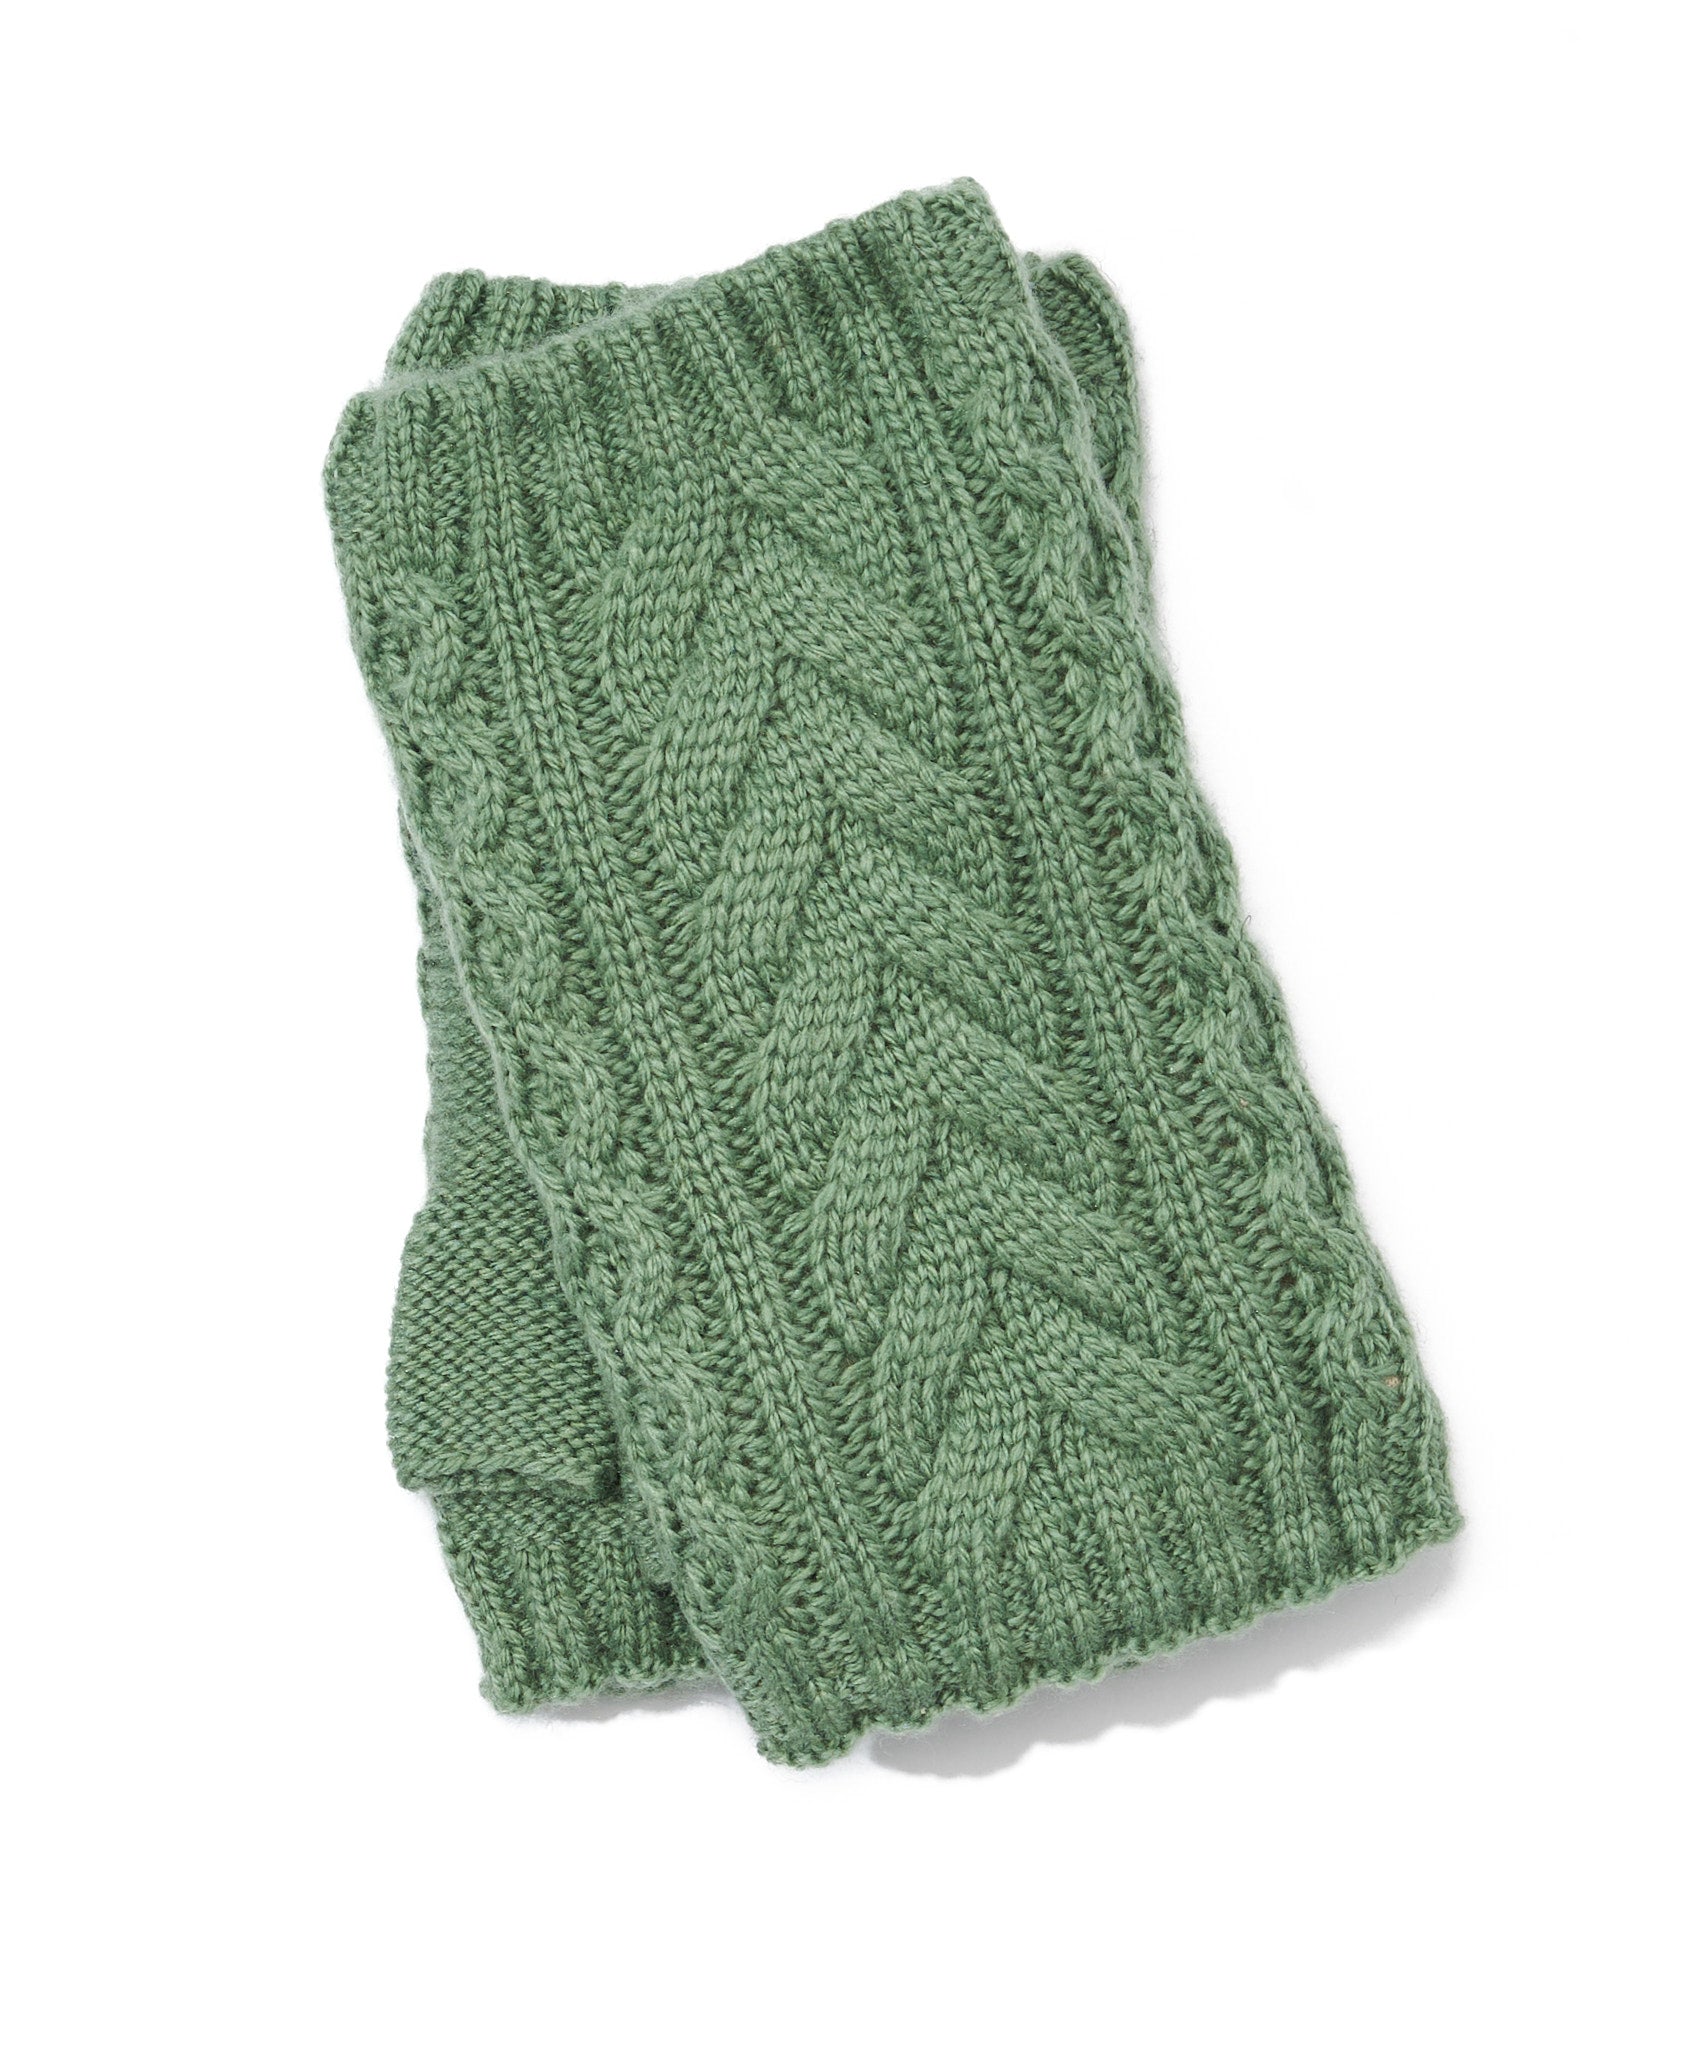 Recycled Wishbone Cable Handwarmer in color Cucumber